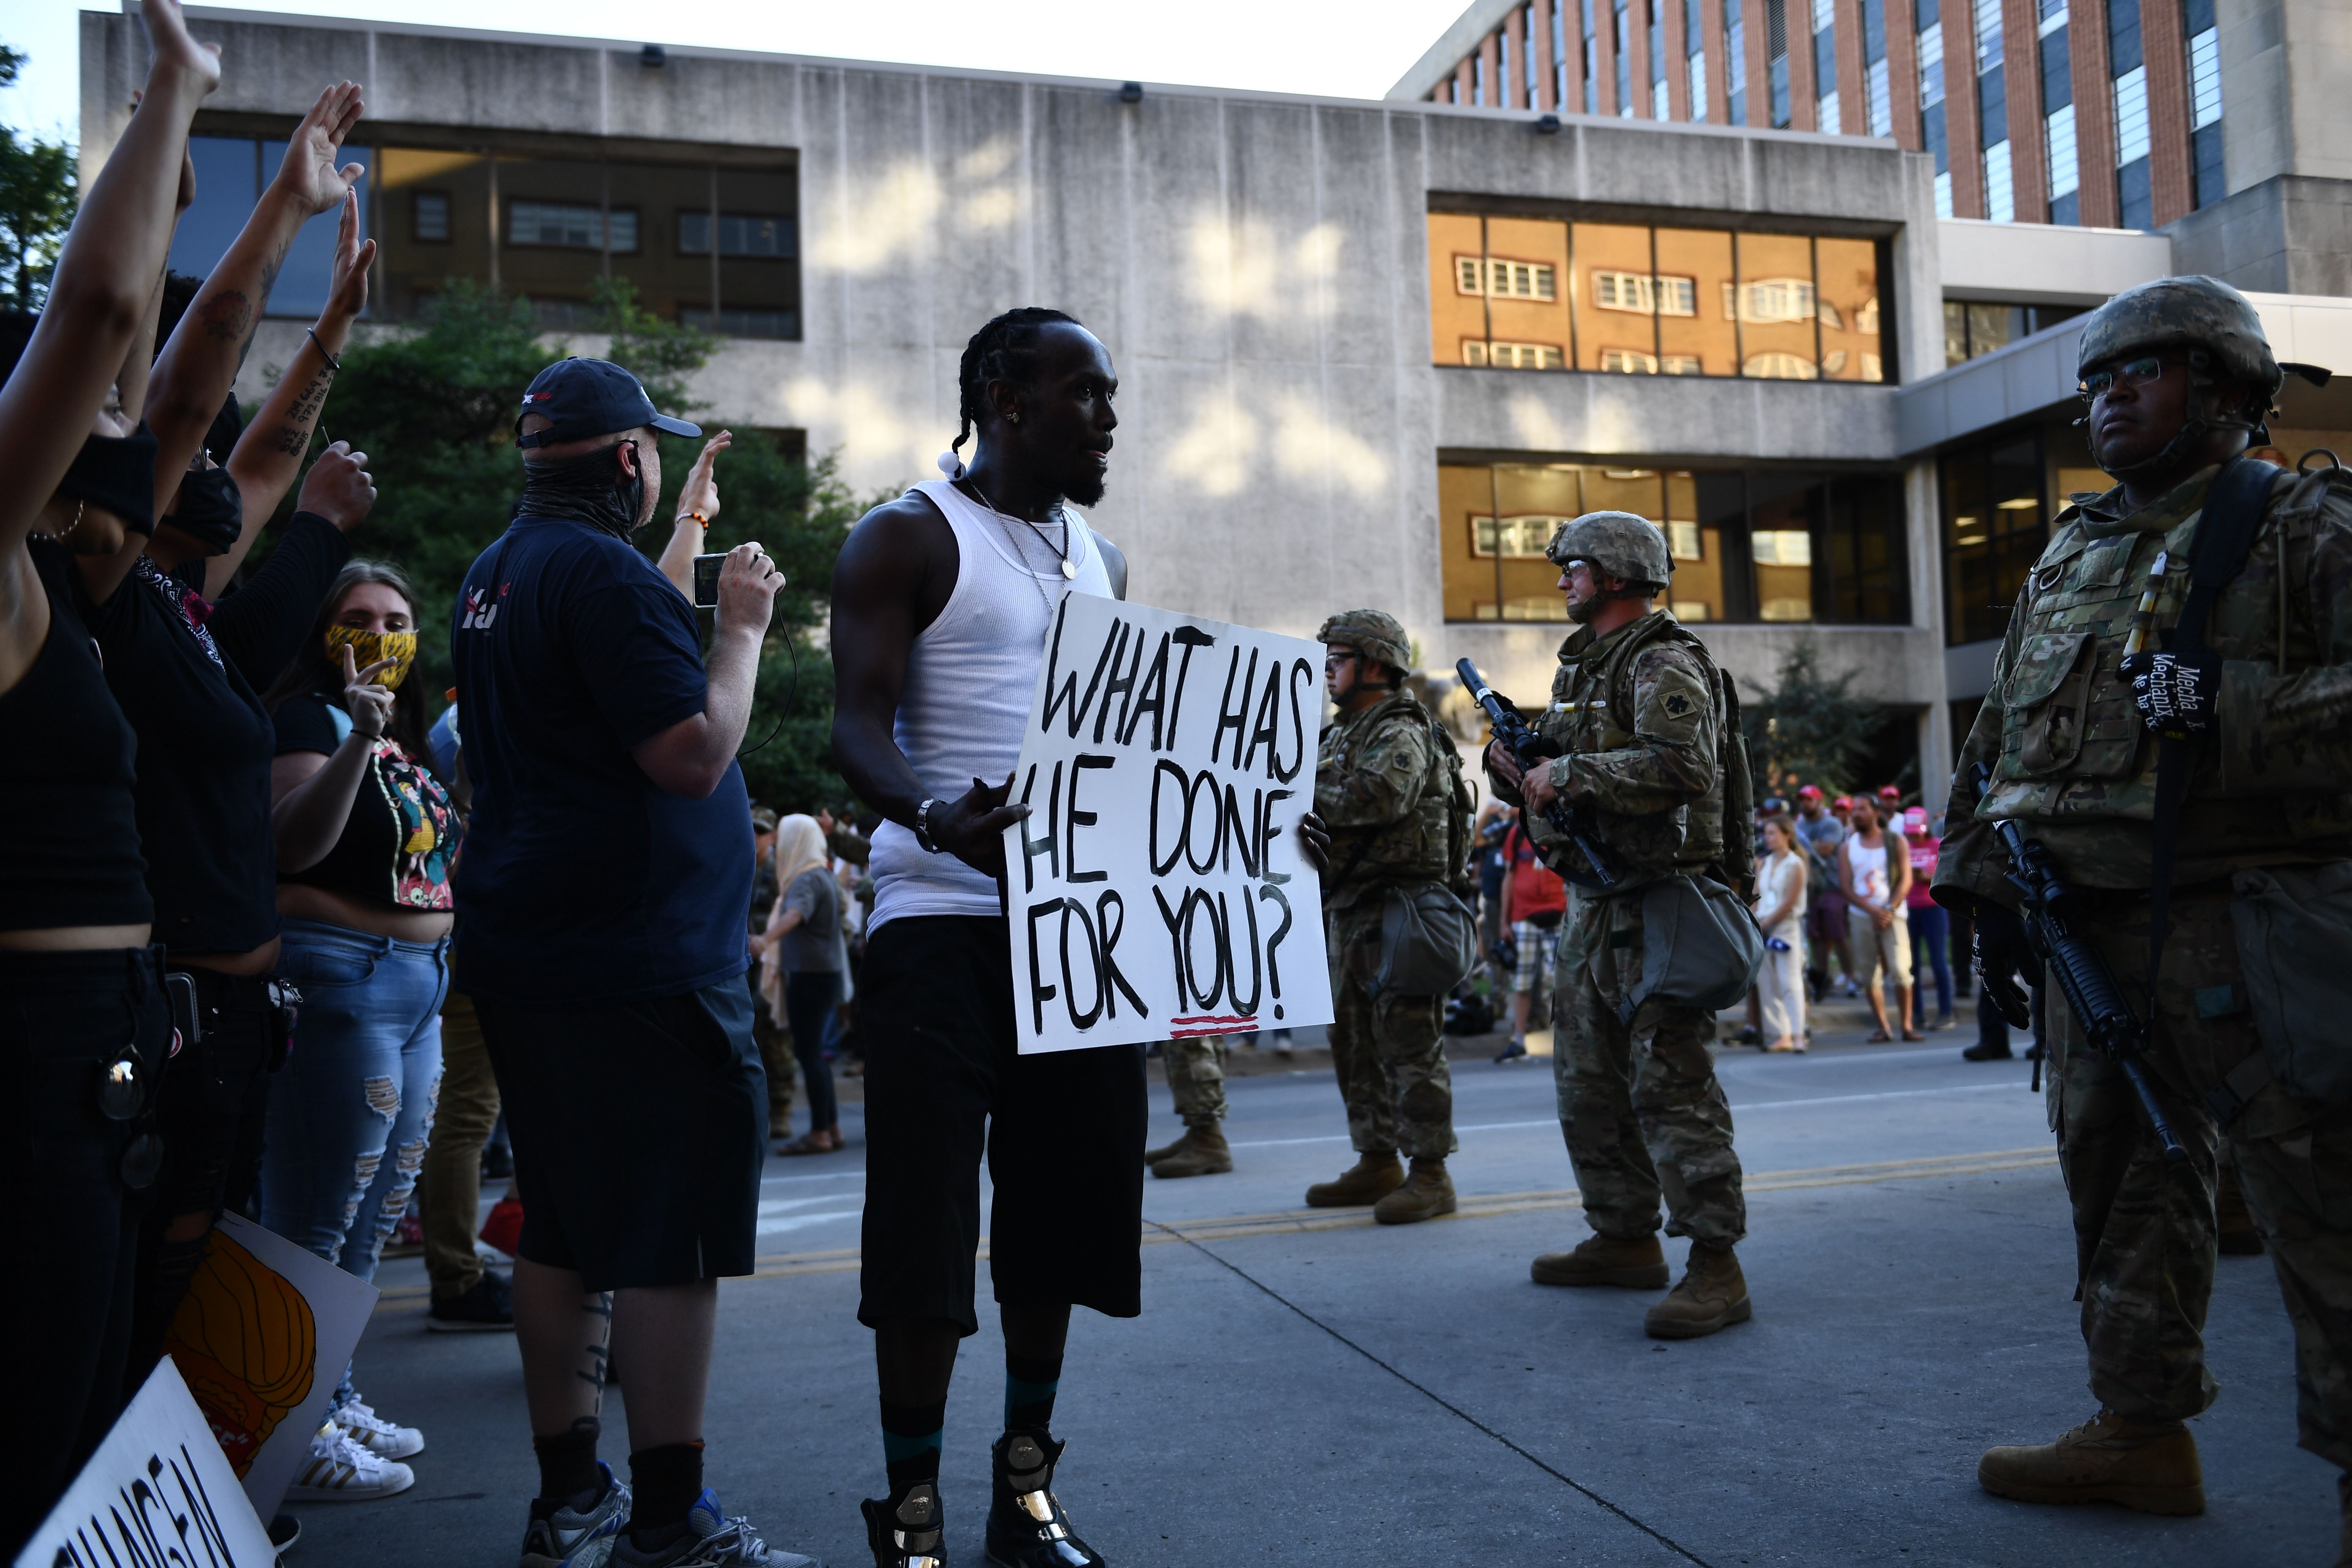 Delano Frazir a "Black Lives Matter" protestor holds a sign in front of National Guards in Tulsa, Oklahoma where Donald Trump holds a campaign rally at the BOK Center on June 20, 2020. - Hundreds of supporters lined up early for Donald Trump's first political rally in months, saying the risk of contracting COVID-19 in a big, packed arena would not keep them from hearing the president's campaign message. (Photo by Brendan Smialowski / AFP) (Photo by BRENDAN SMIALOWSKI/AFP via Getty Images)